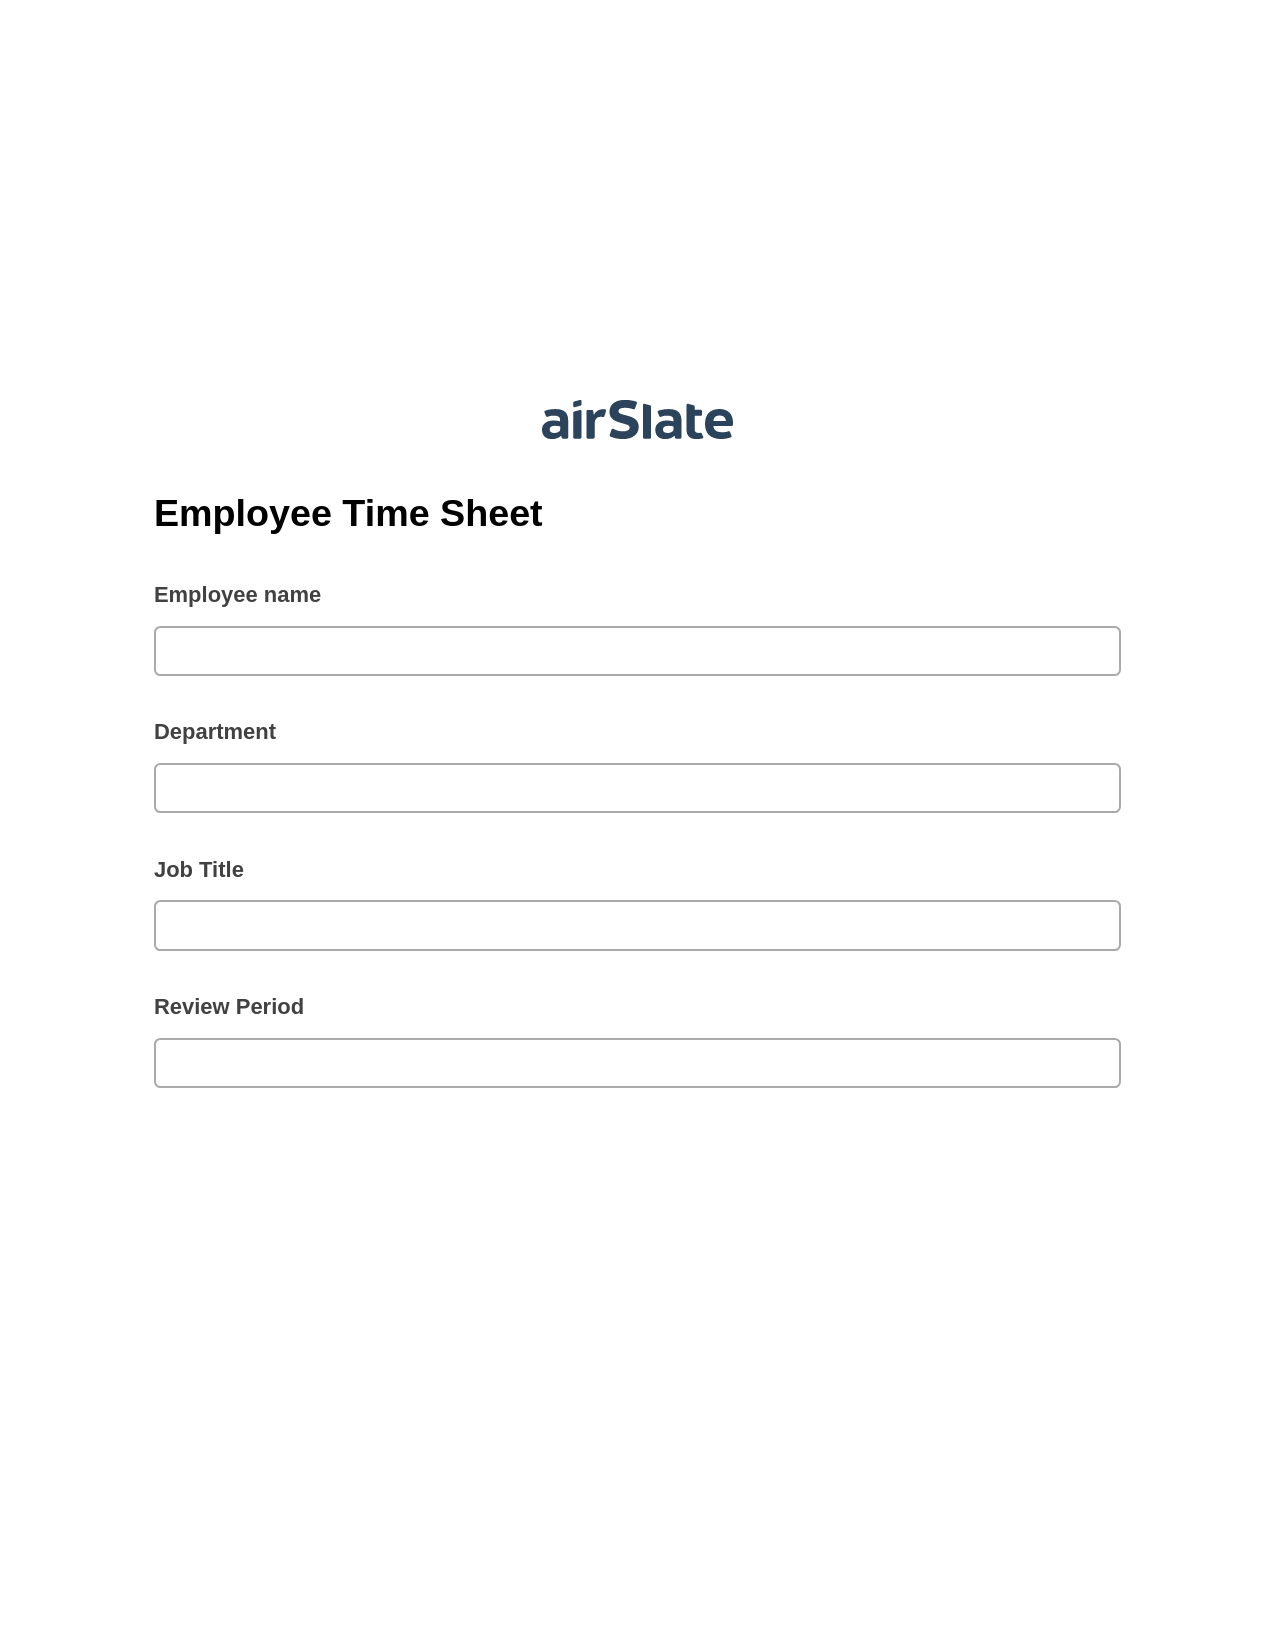 Multirole Employee Time Sheet Prefill from NetSuite records, Update Audit Trail Bot, Export to Smartsheet